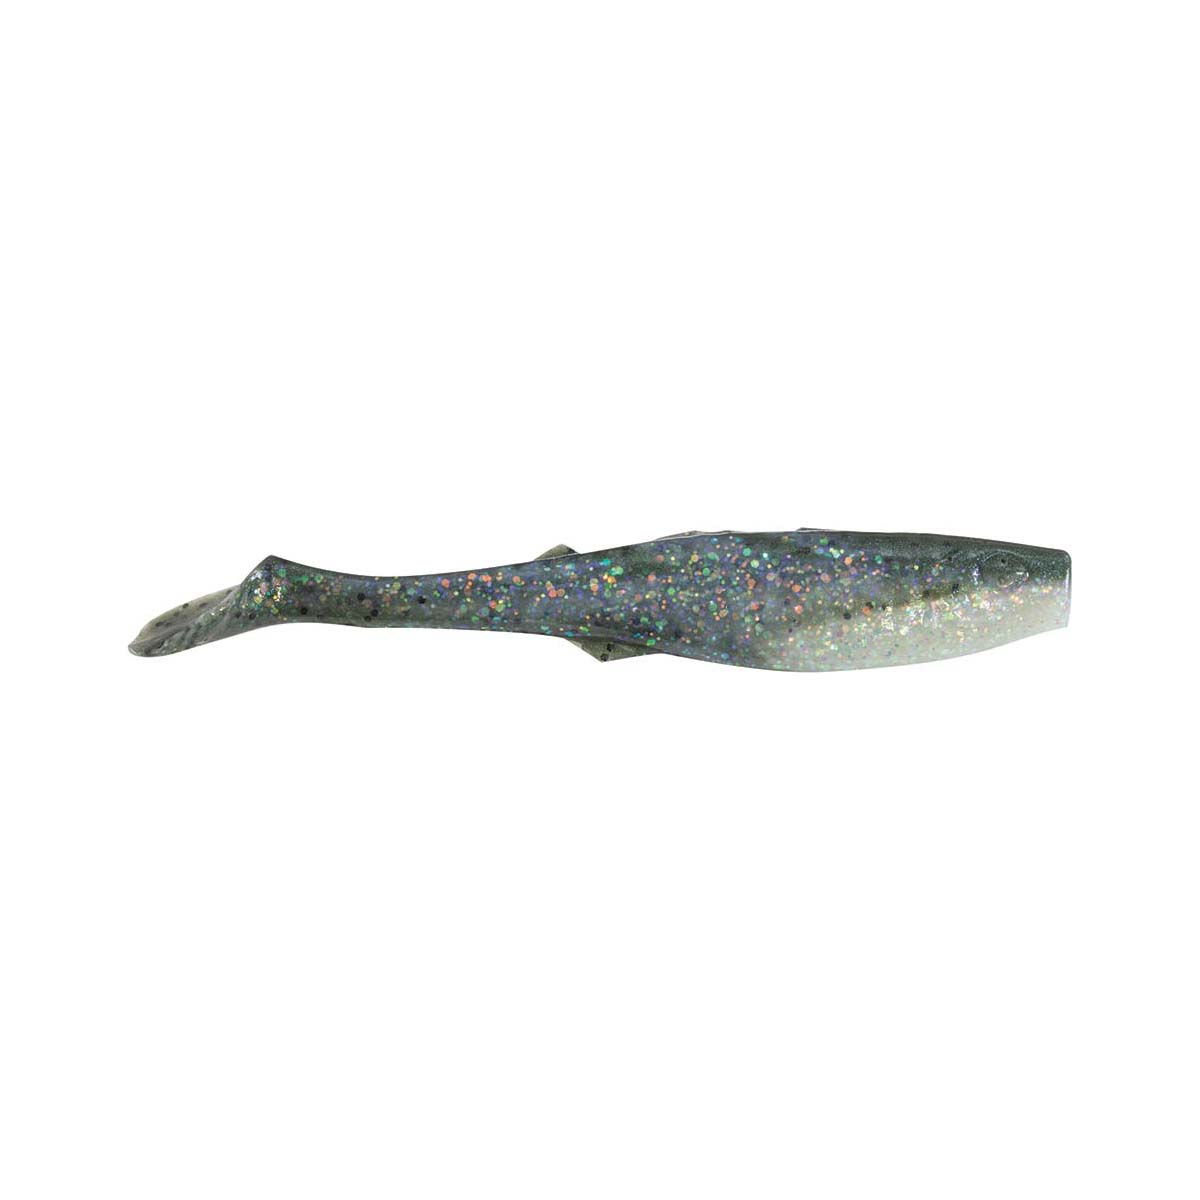 Berkley Gulp! Paddletail Shad Soft Plastic Lure 3in Silver Molting